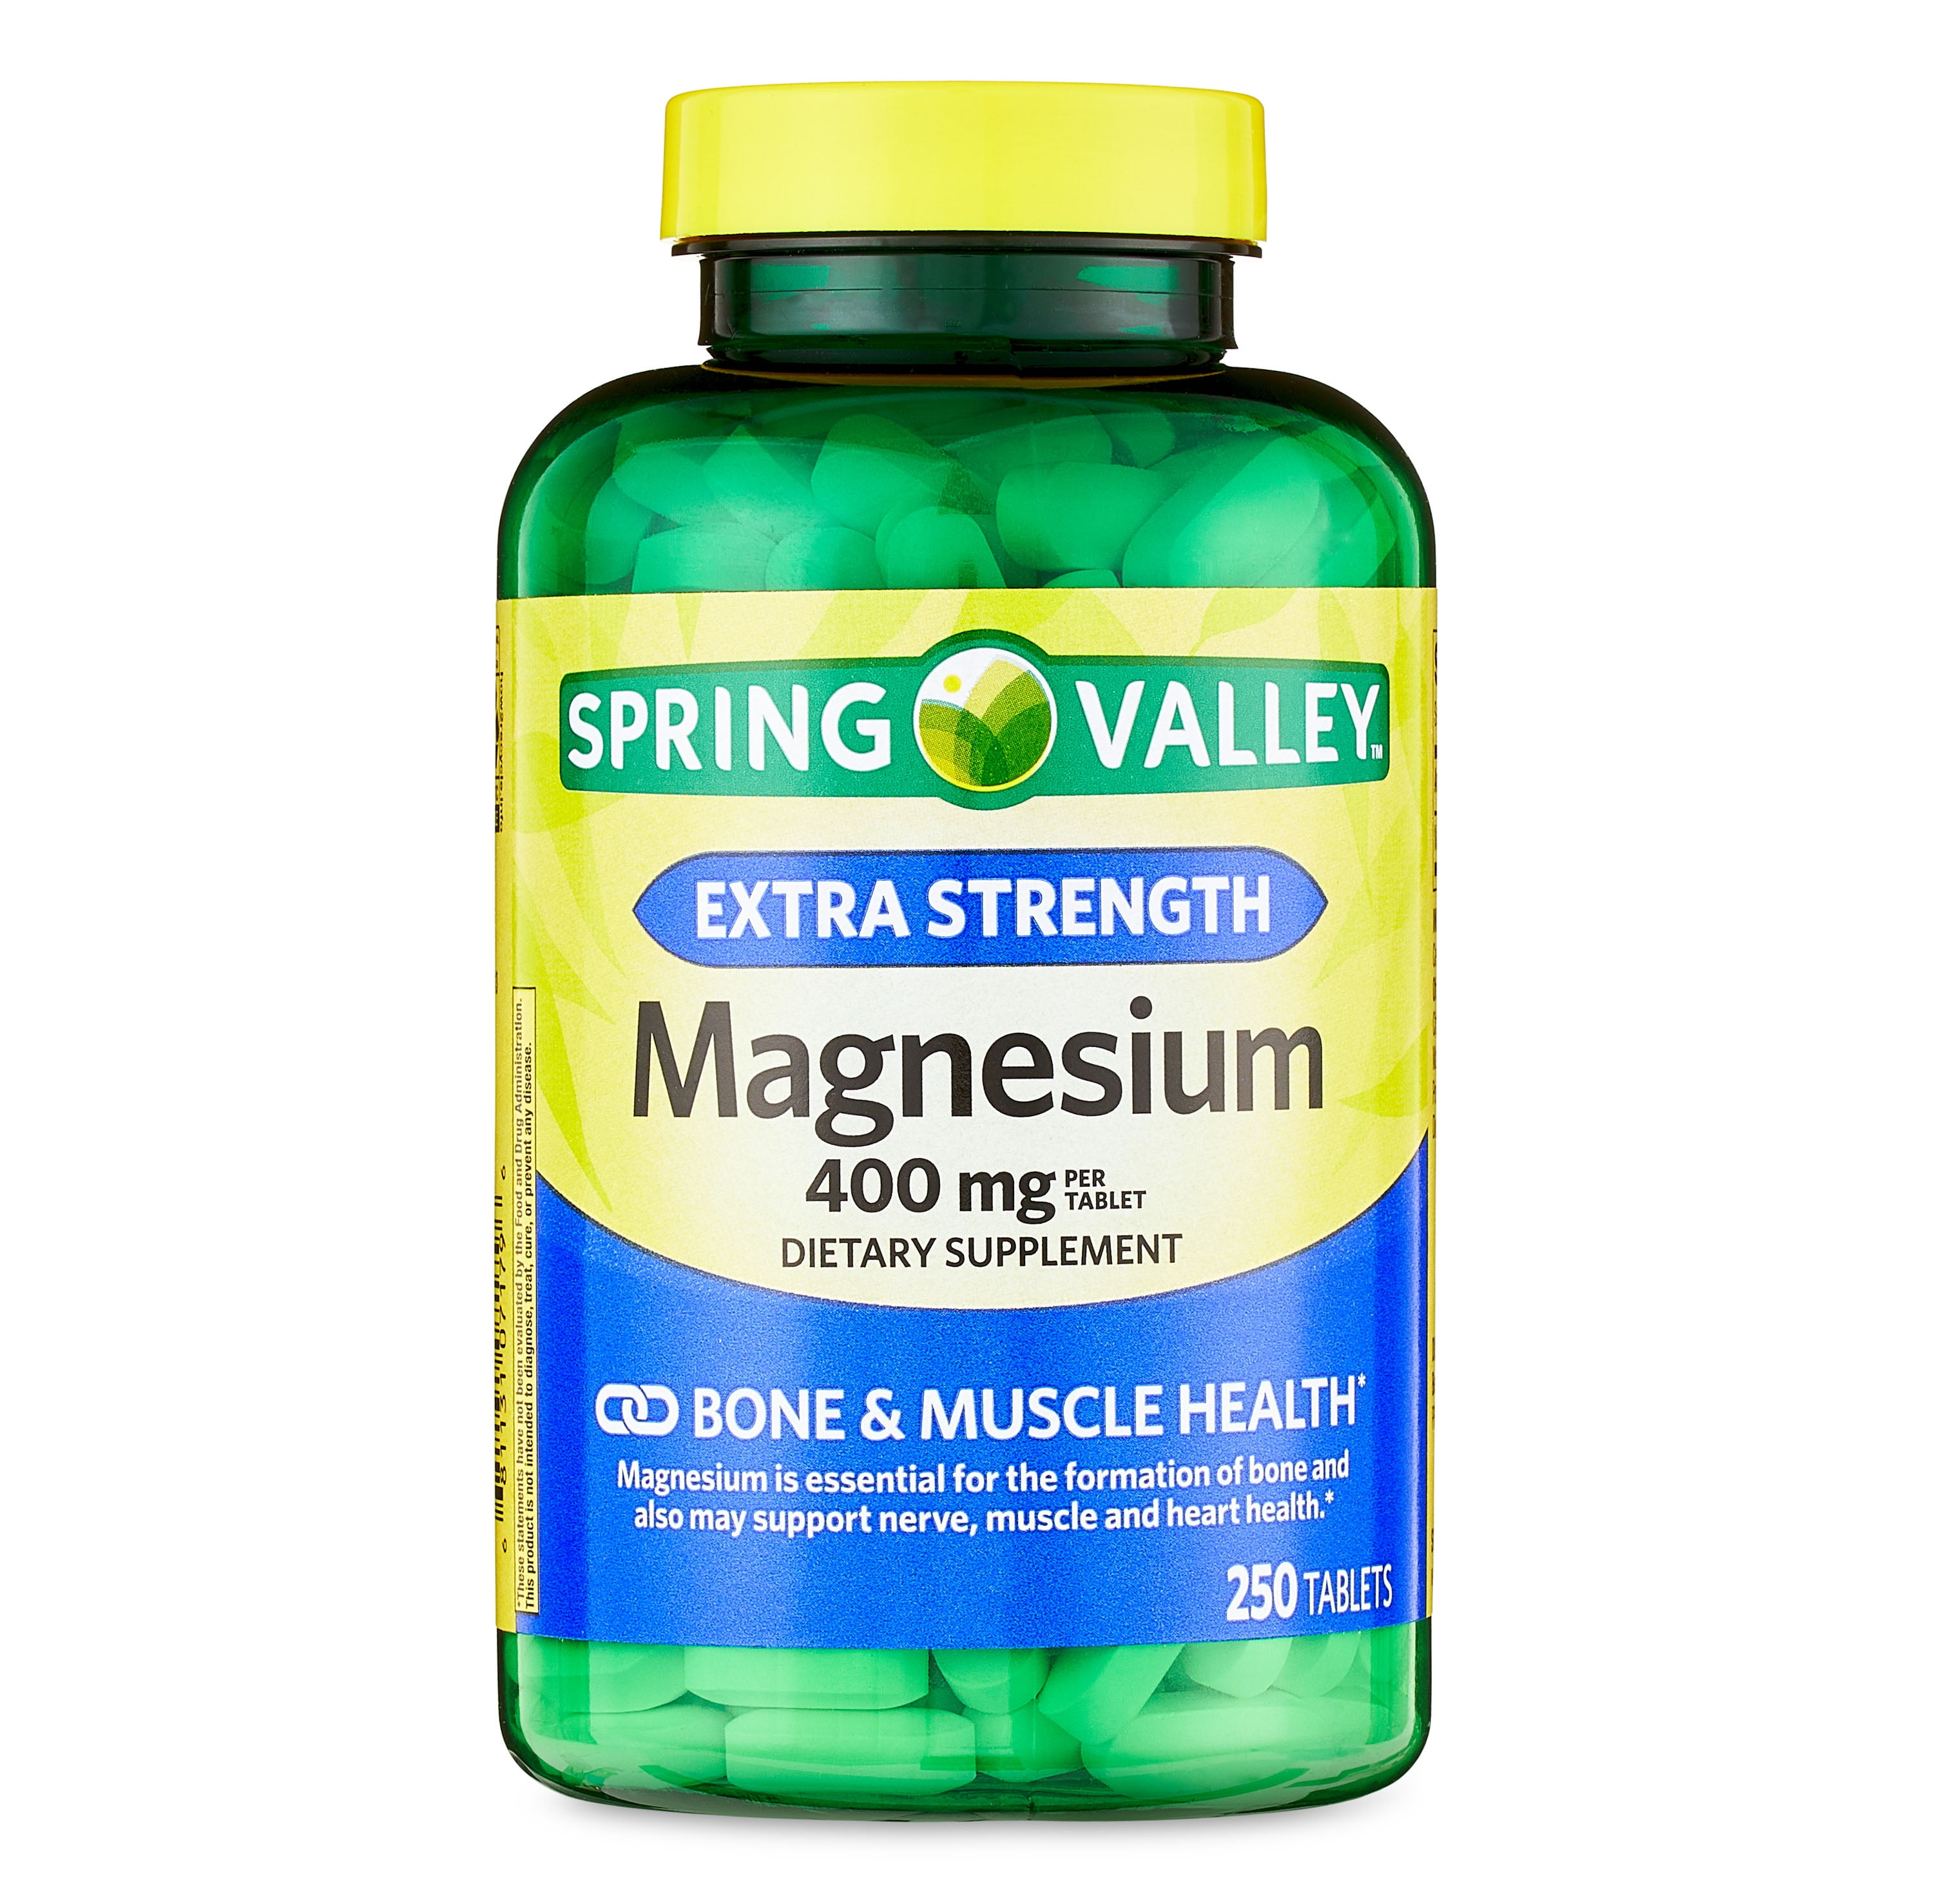 Spring Valley Extra Strength Magnesium Tablets Dietary Supplement, 400 mg, 250 Count